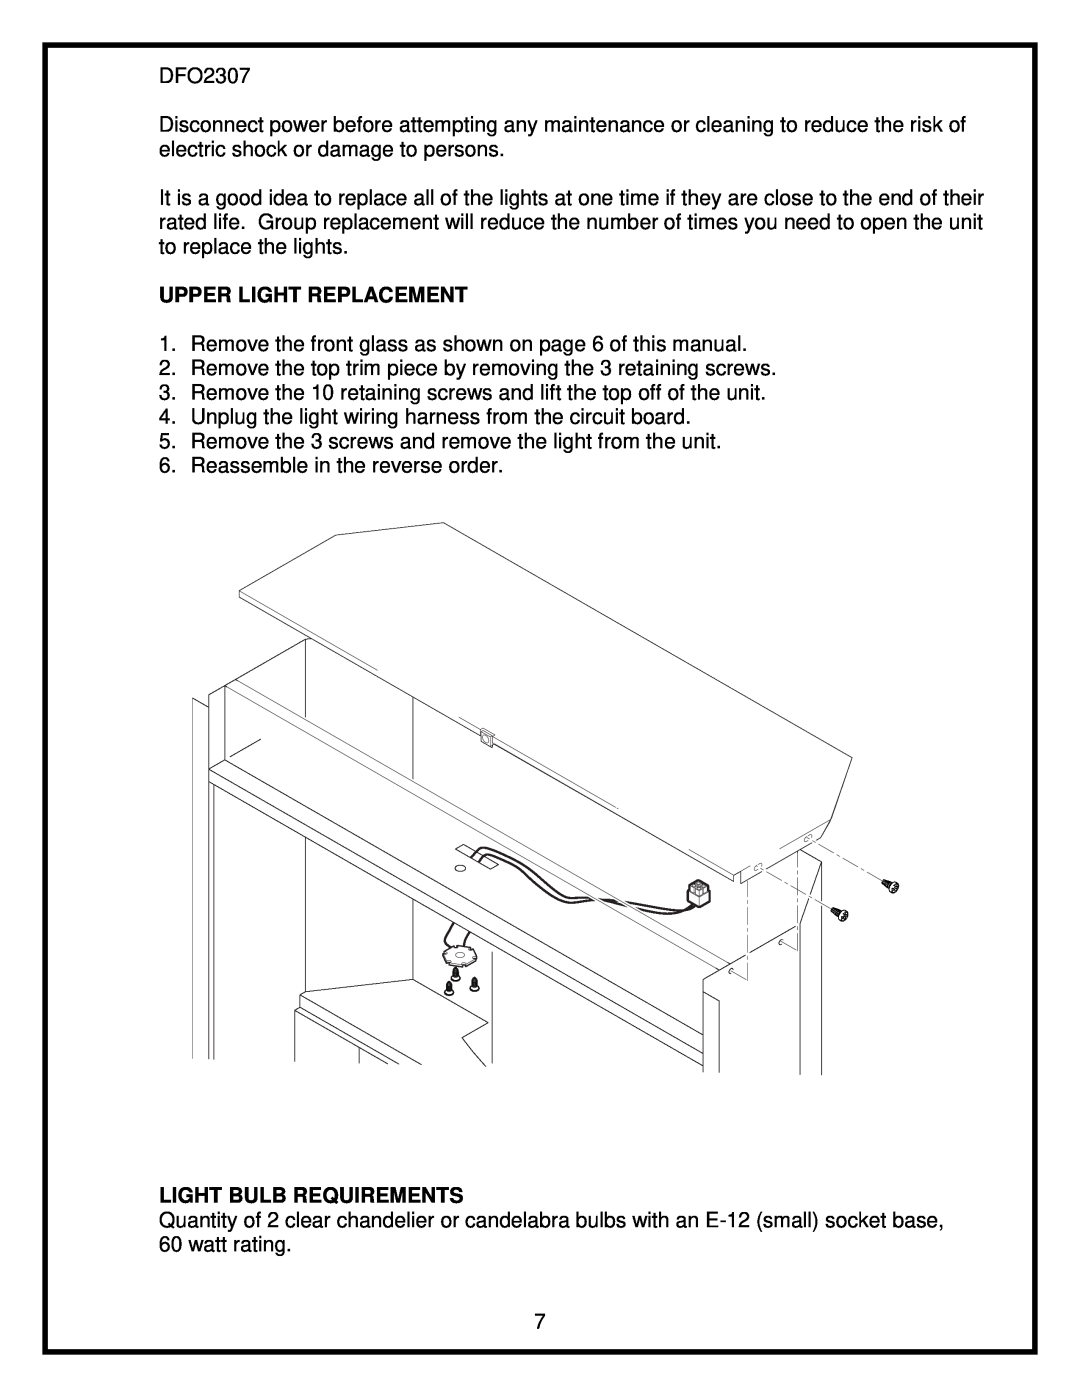 Dimplex DFO2307 service manual Upper Light Replacement, Light Bulb Requirements 